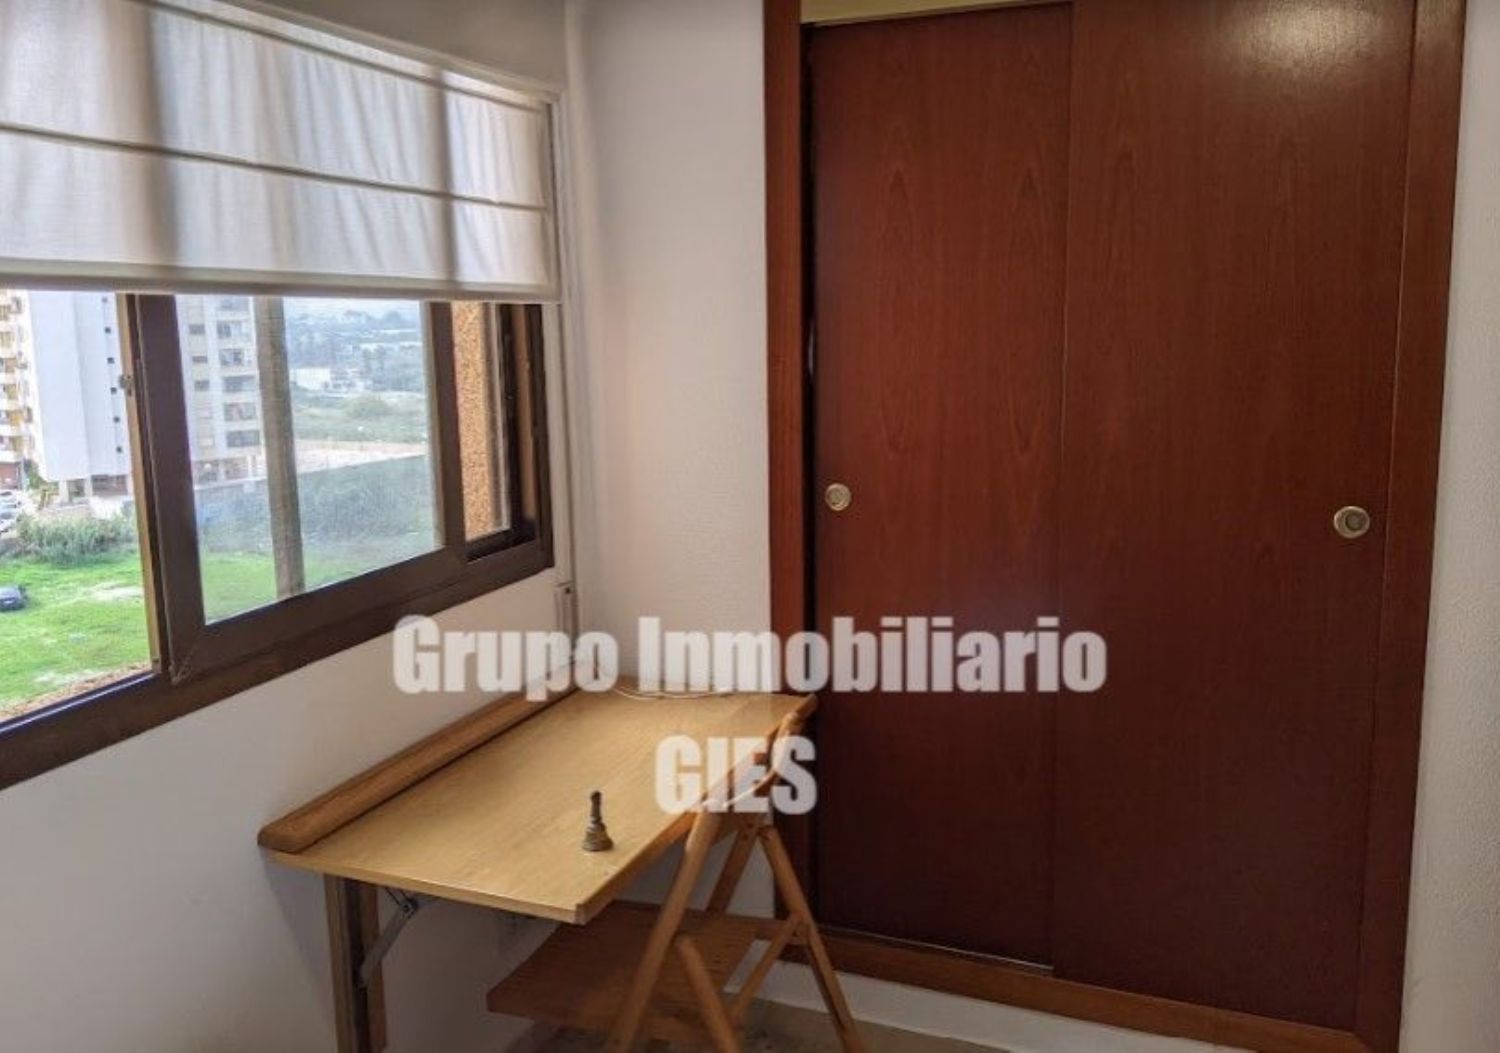 Apartment for sale on the seafront on Mar Blau N-01 street, in Sueca